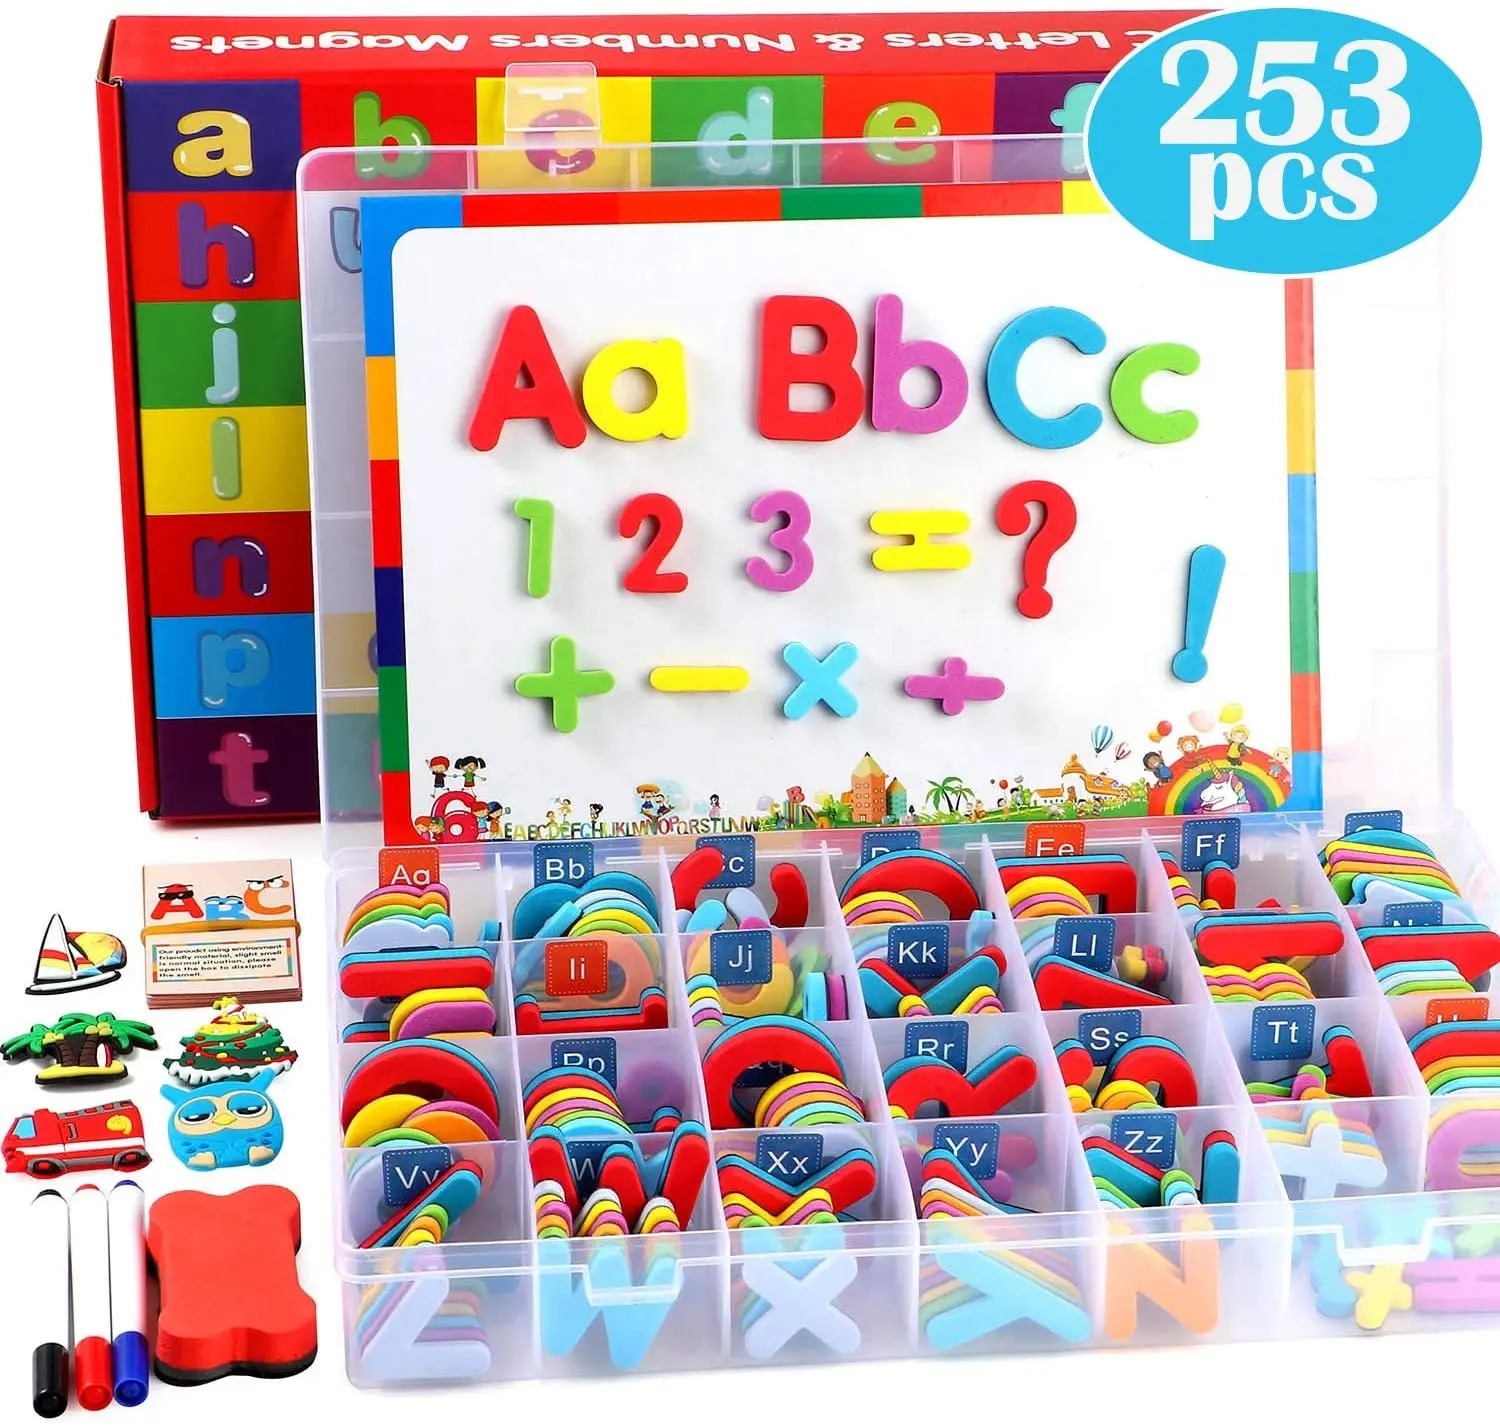 Lovely Toys Plastic Alphabet Letter Magnetic Foam Letters And Numbers For Educating Kids